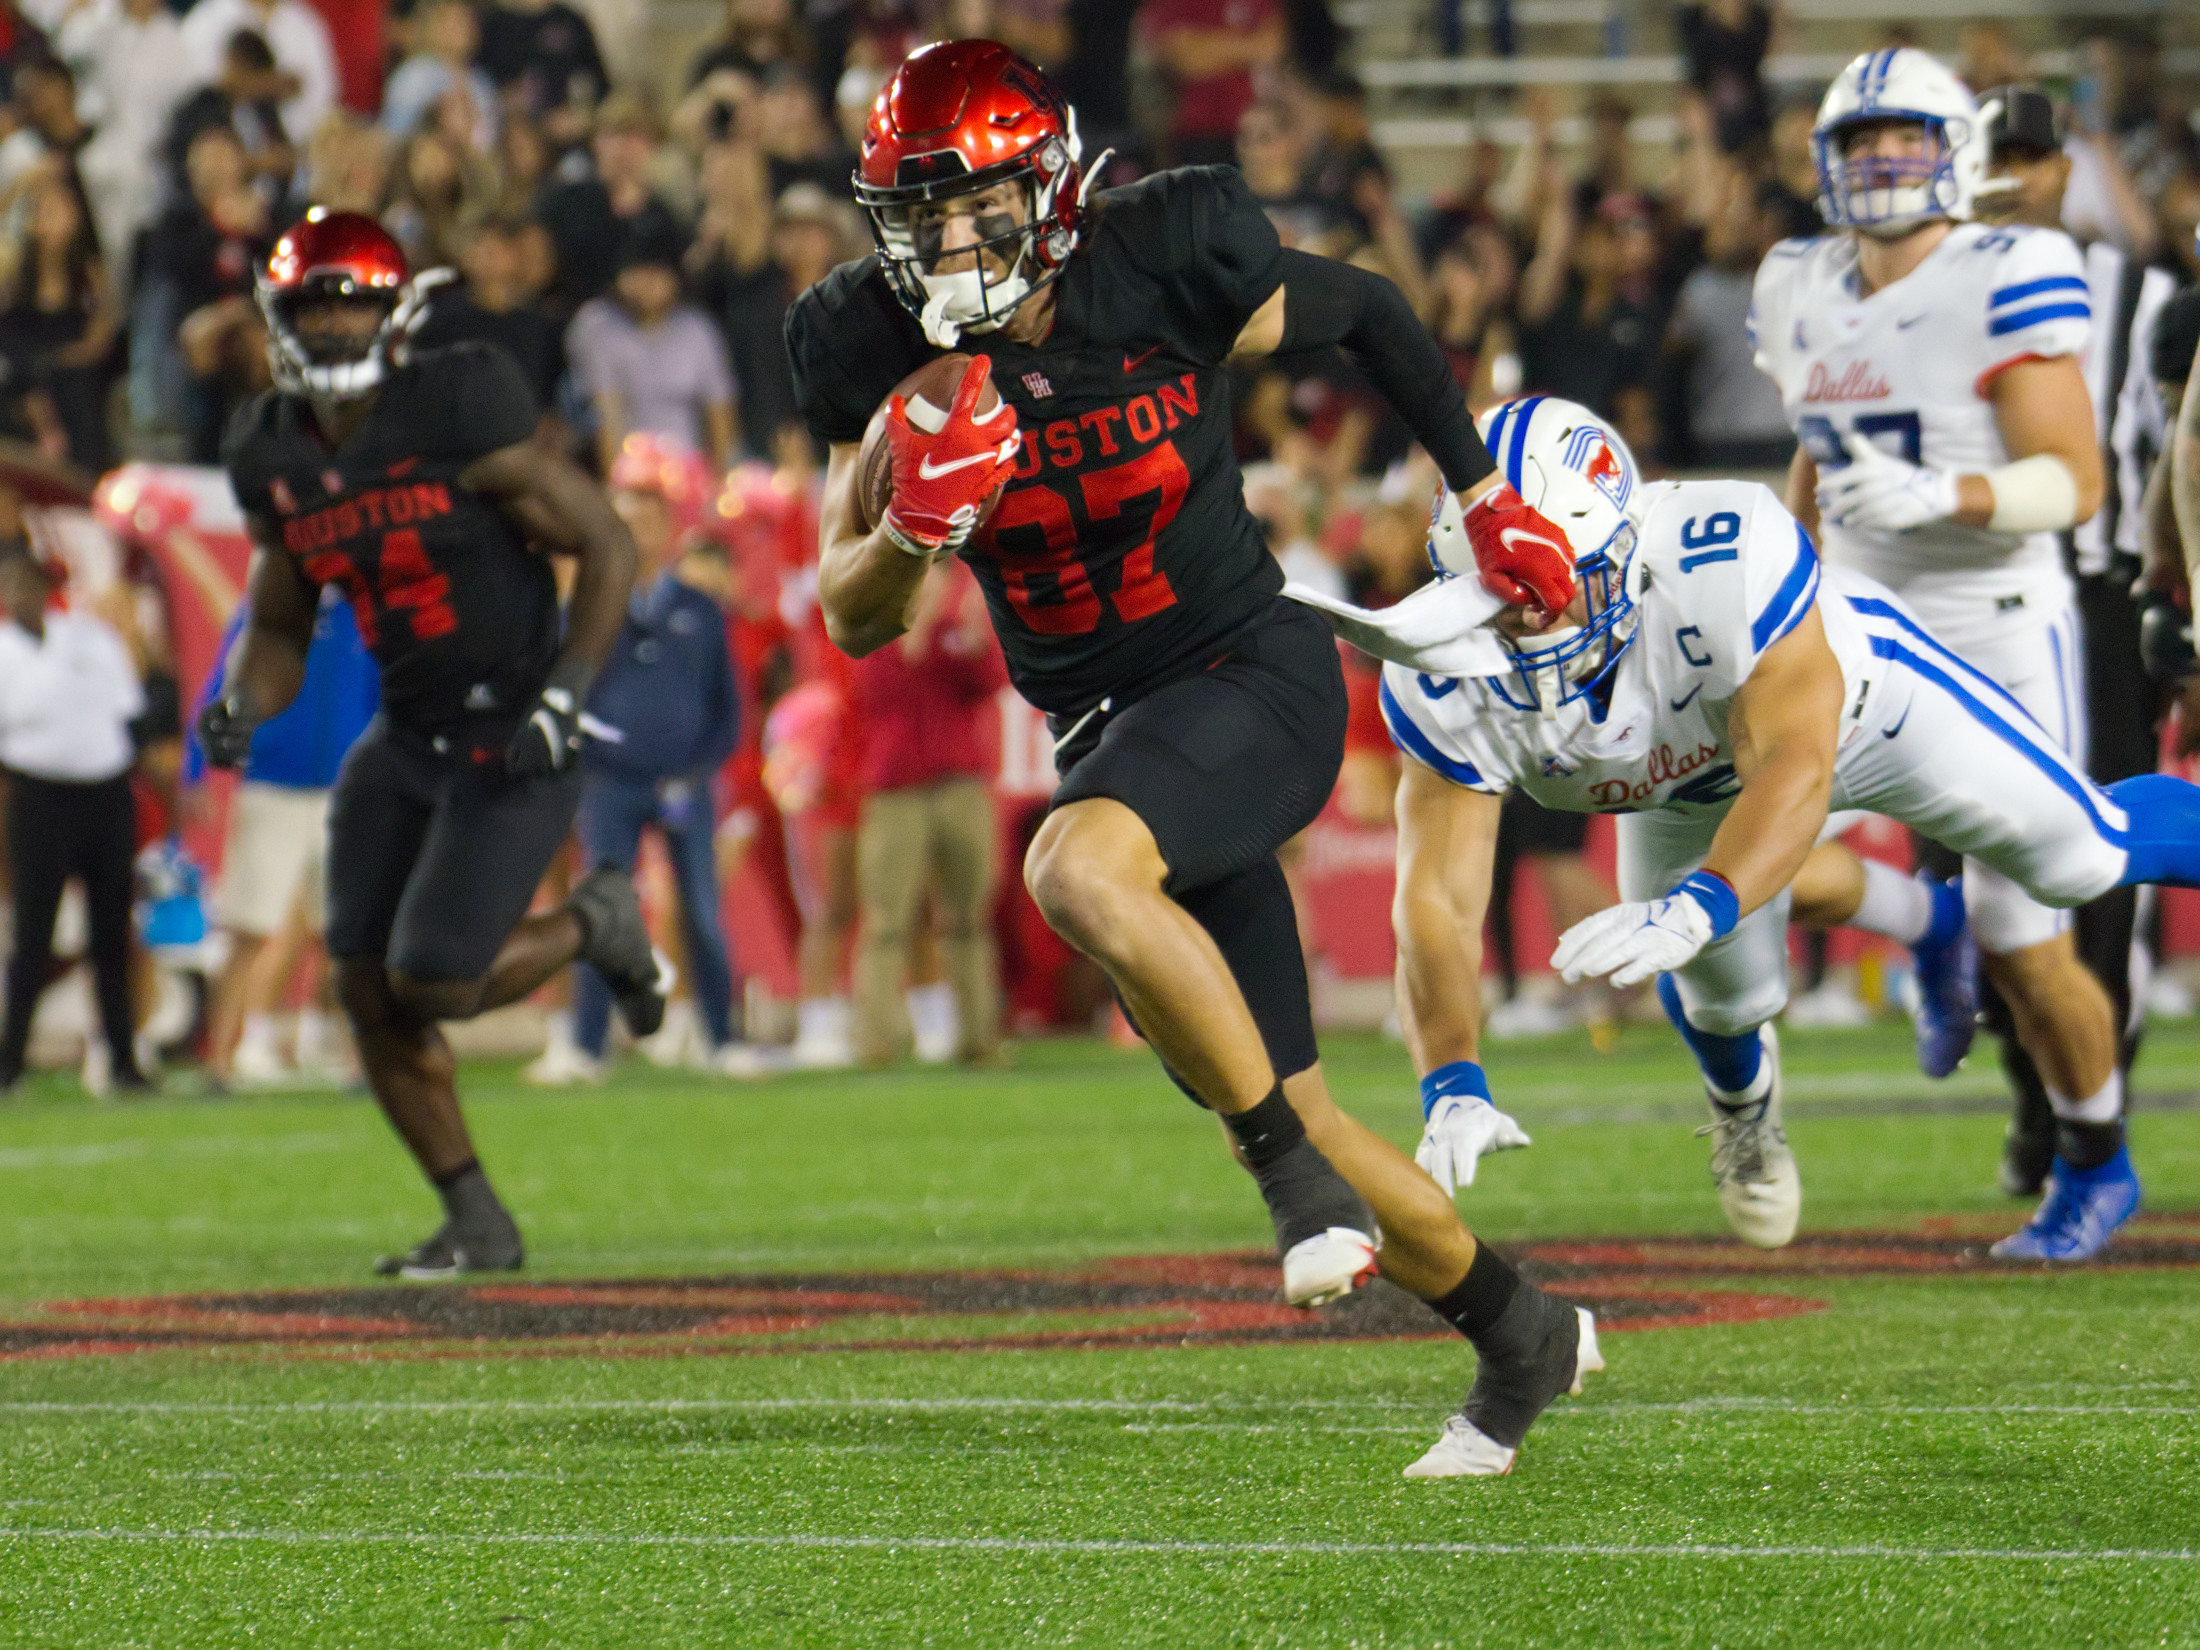 Jake Herslow showed up to UH in January as an unknown, but by November the receiver has established himself as one of the staples of the Cougars offense. | Steven Paultanis/The Cougar